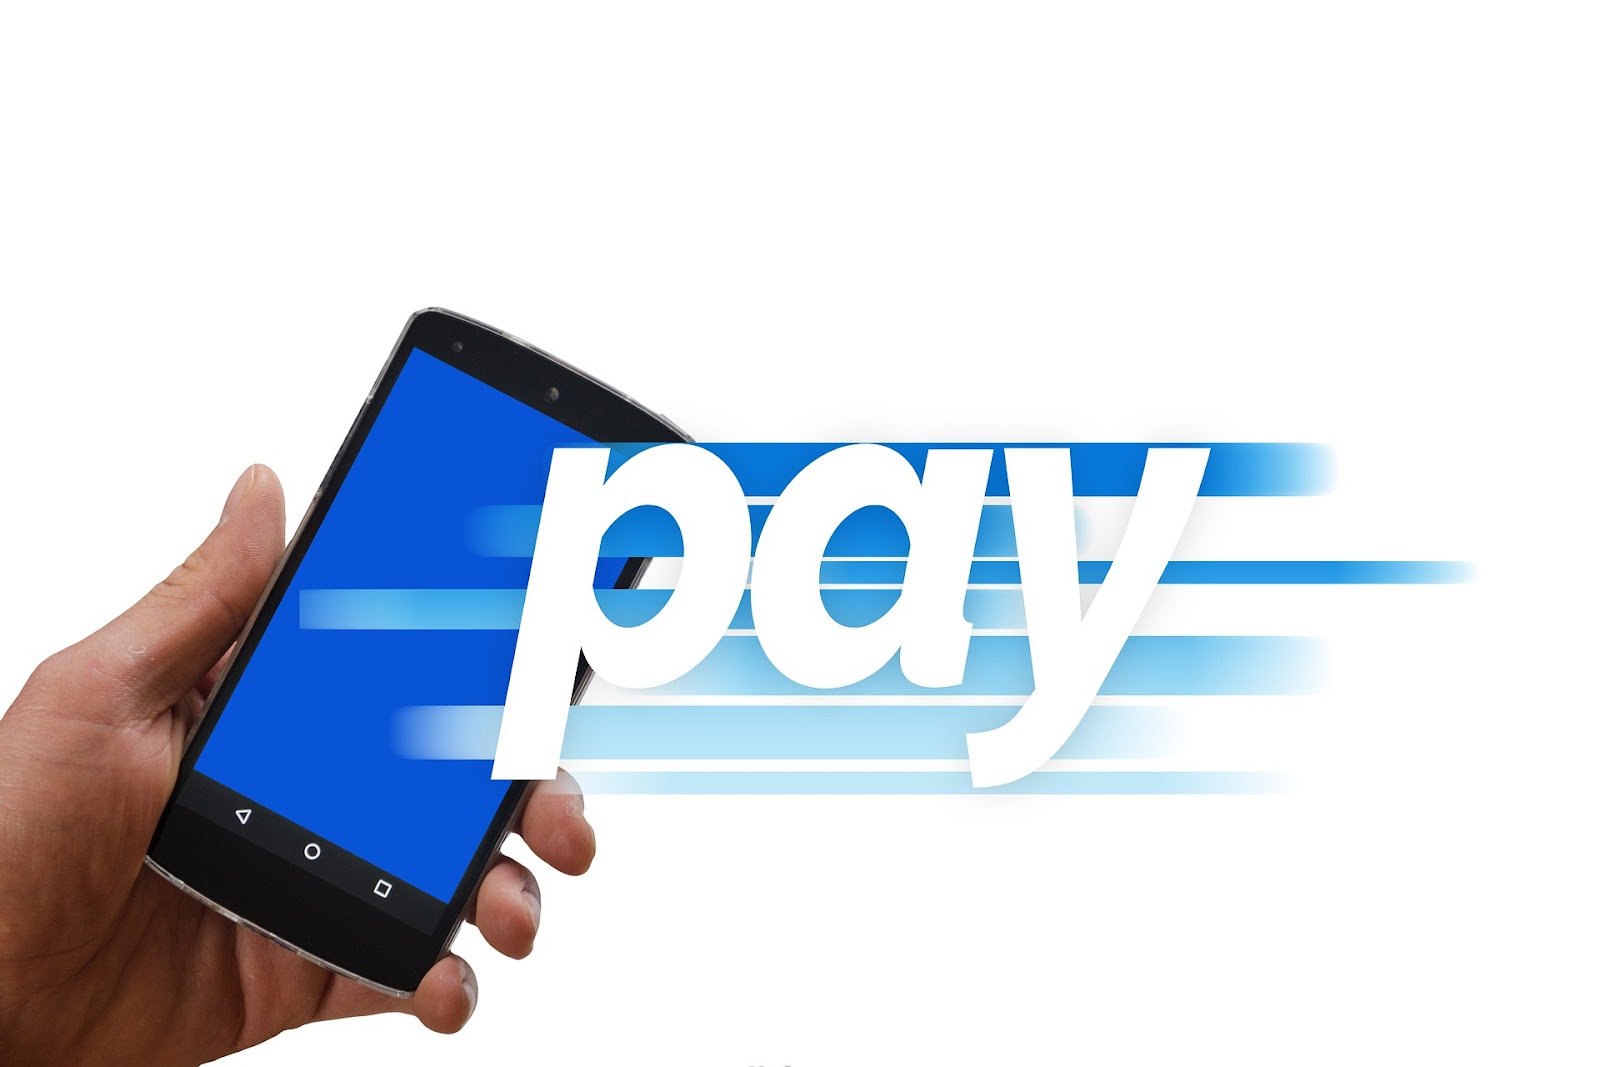 An image of a hand holding a smartphone. The phone's screen is blue, and the word "pay" extends off the screen to the right.